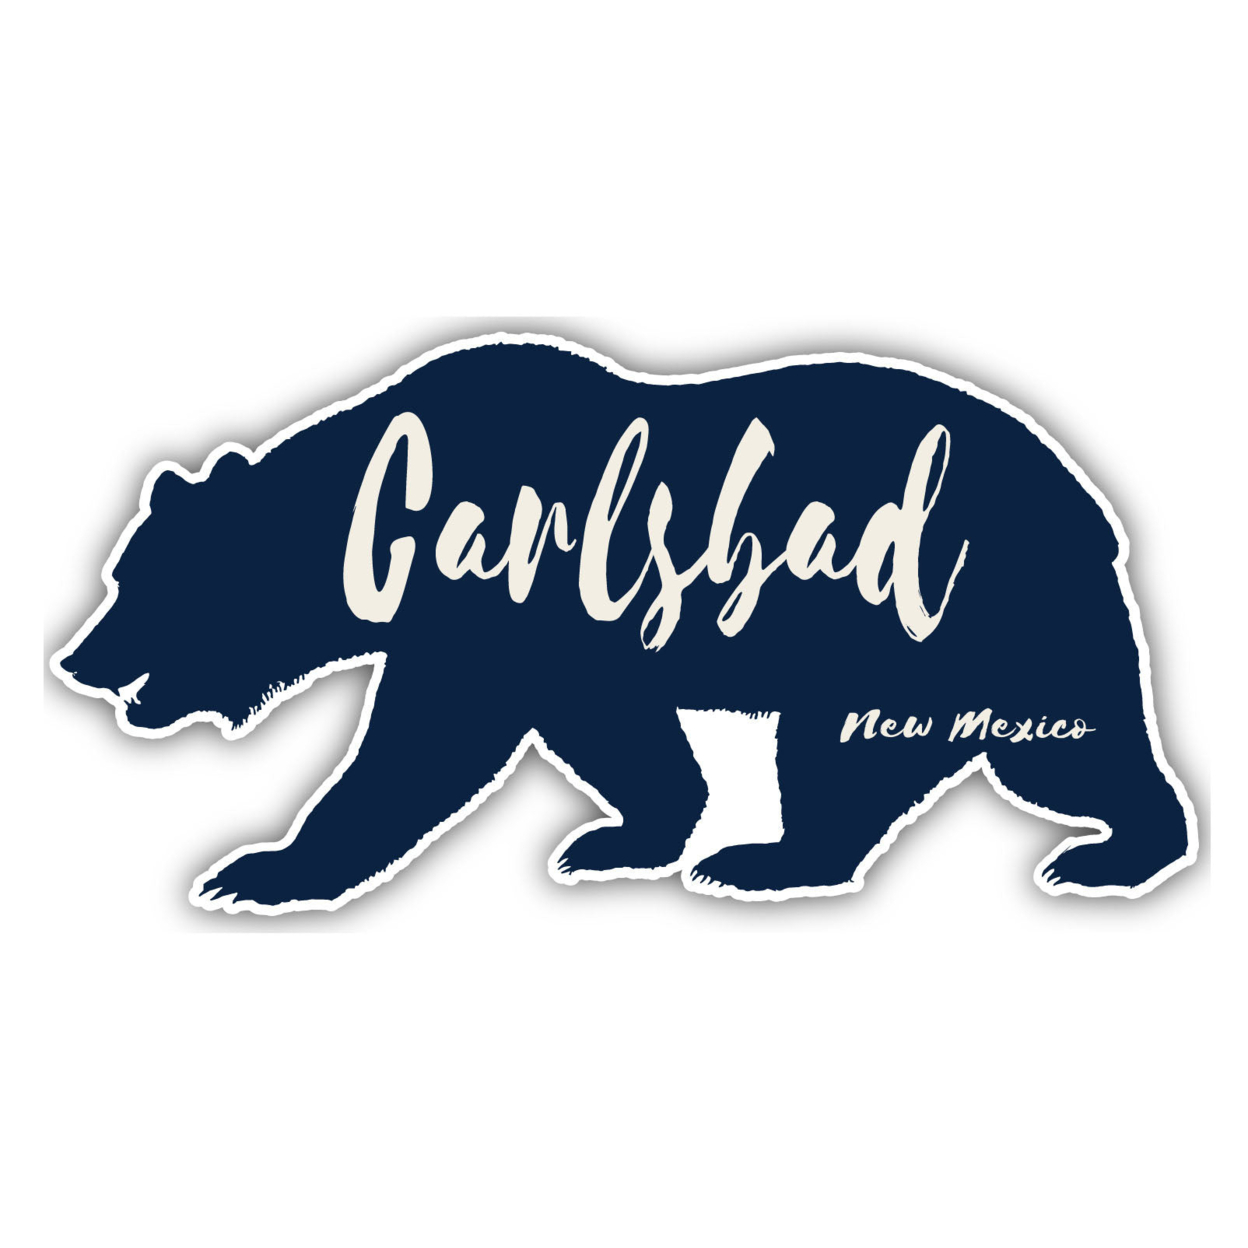 Carlsbad New Mexico Souvenir Decorative Stickers (Choose Theme And Size) - Single Unit, 8-Inch, Great Outdoors